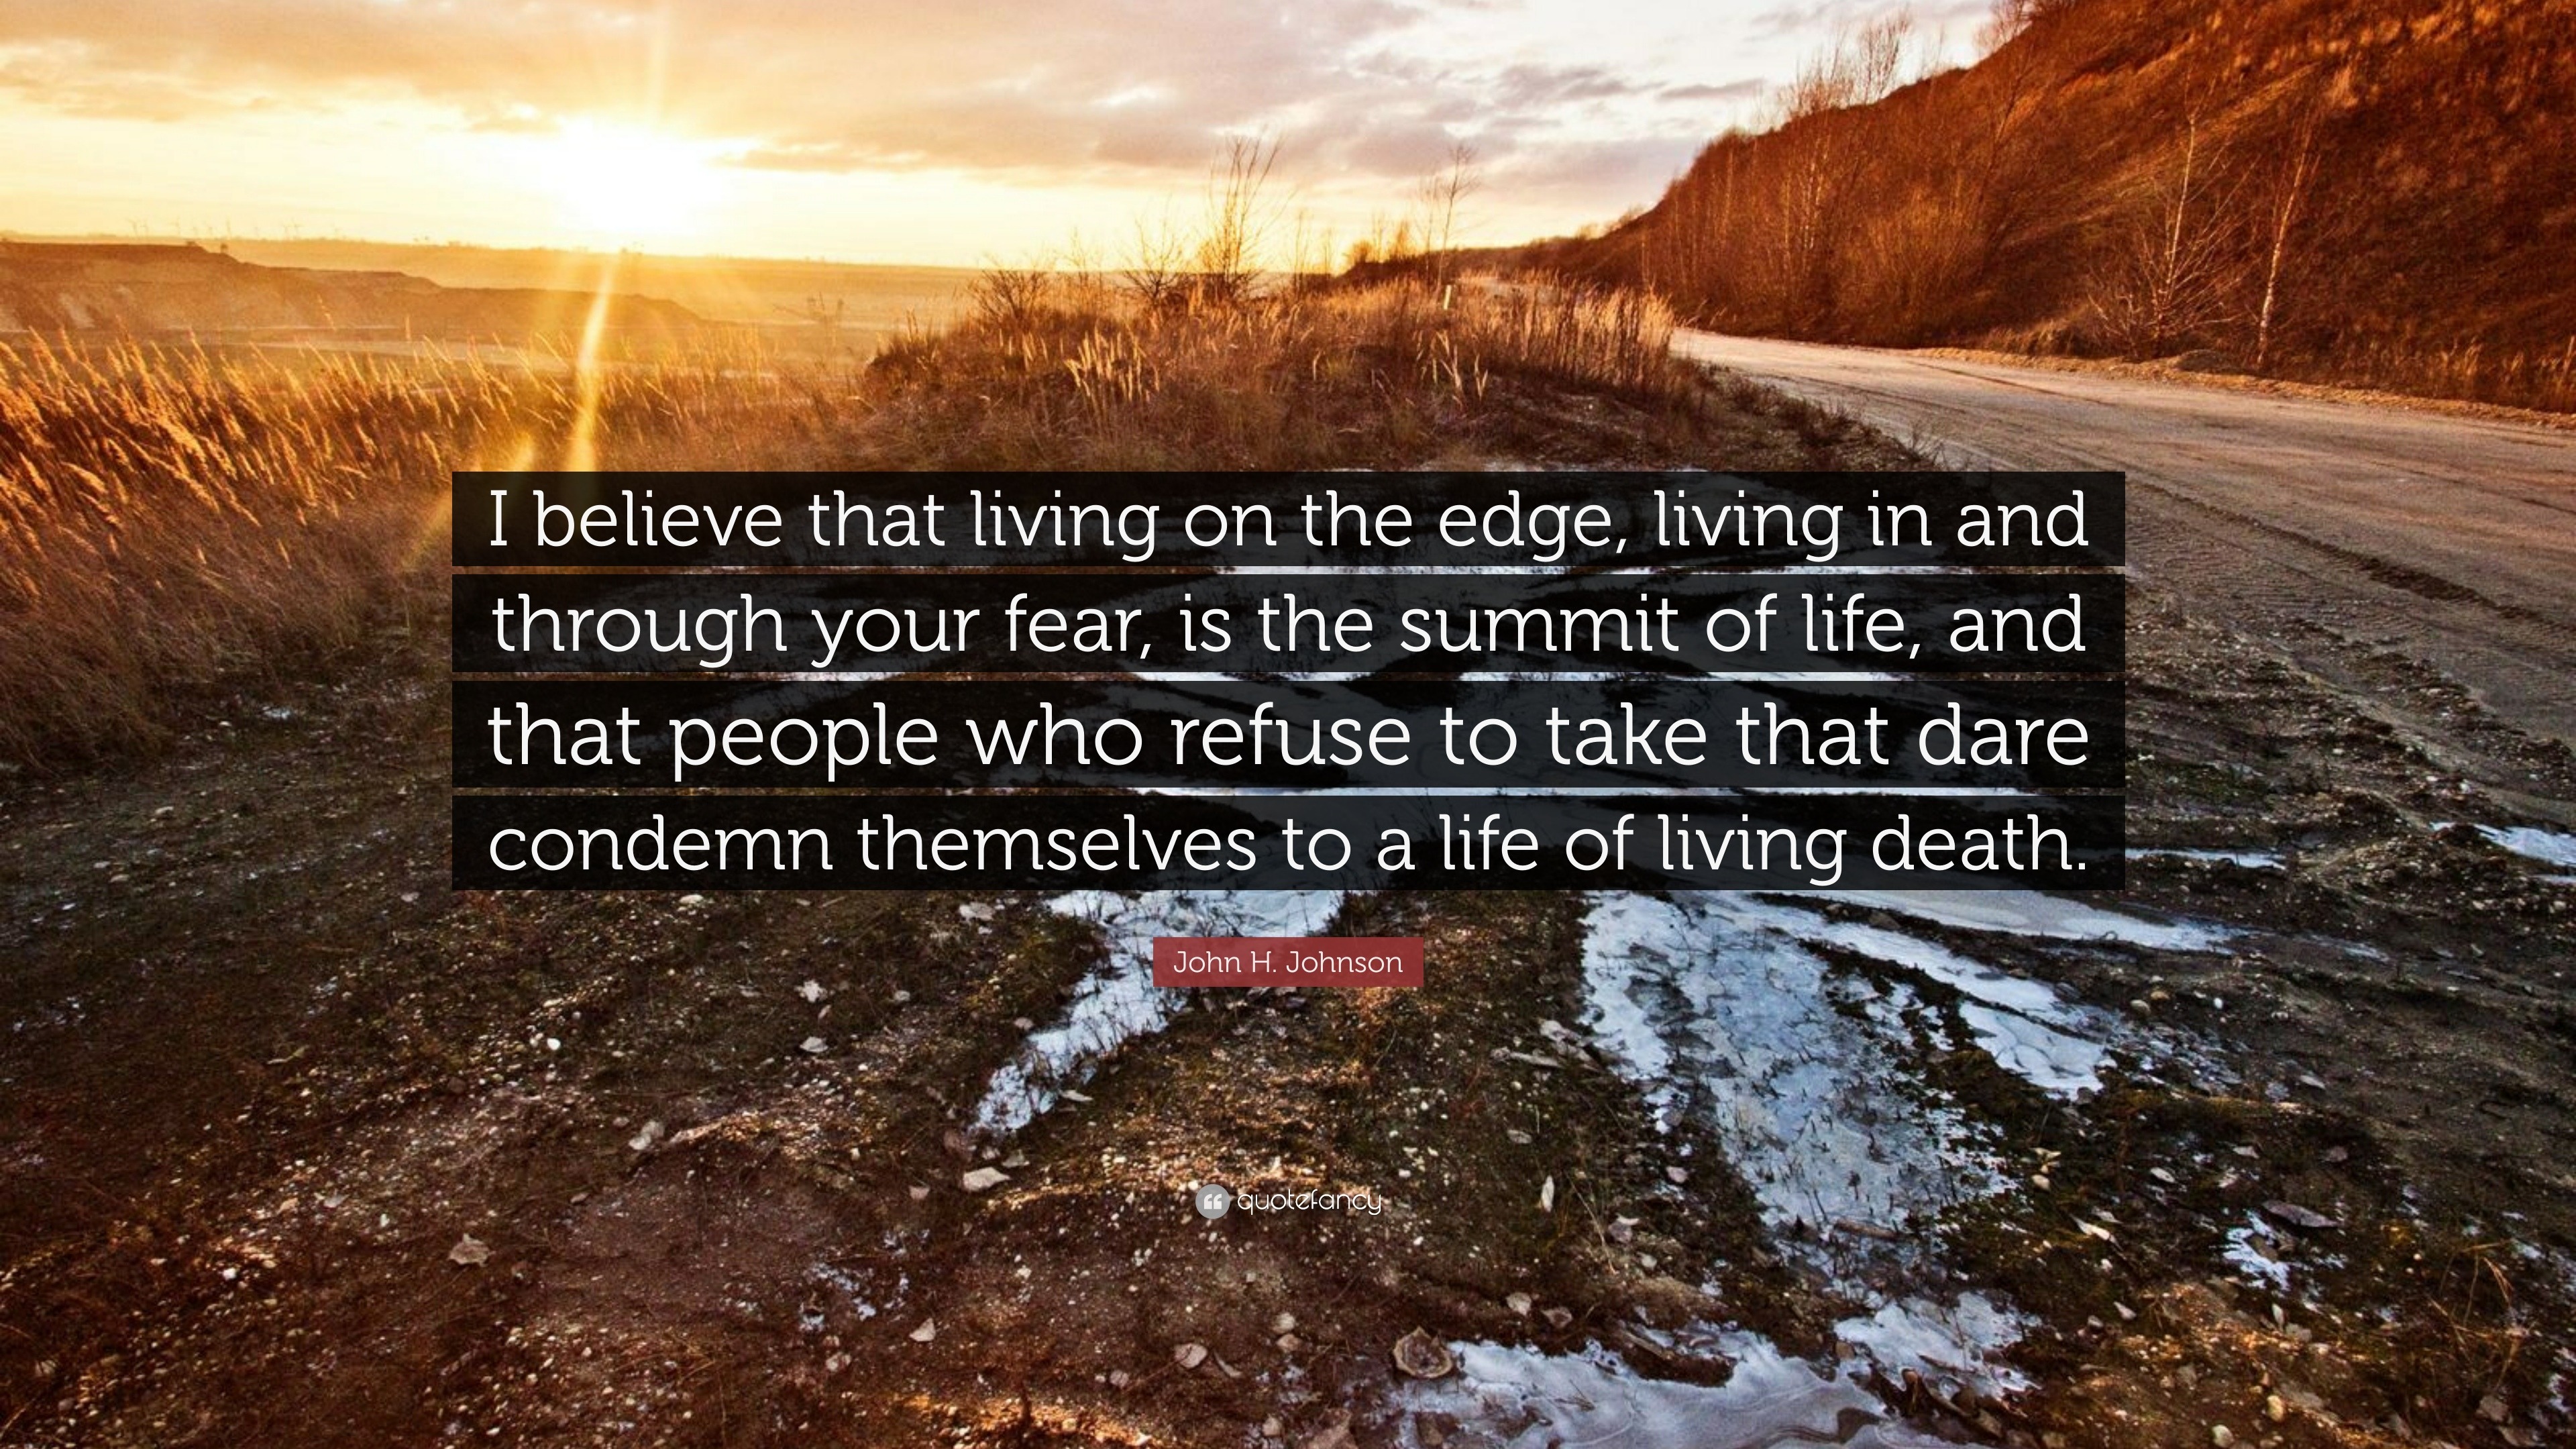 John H Johnson Quote I Believe That Living On The Edge Living In And Through Your Fear Is The Summit Of Life And That People Who Refuse To 7 Wallpapers Quotefancy